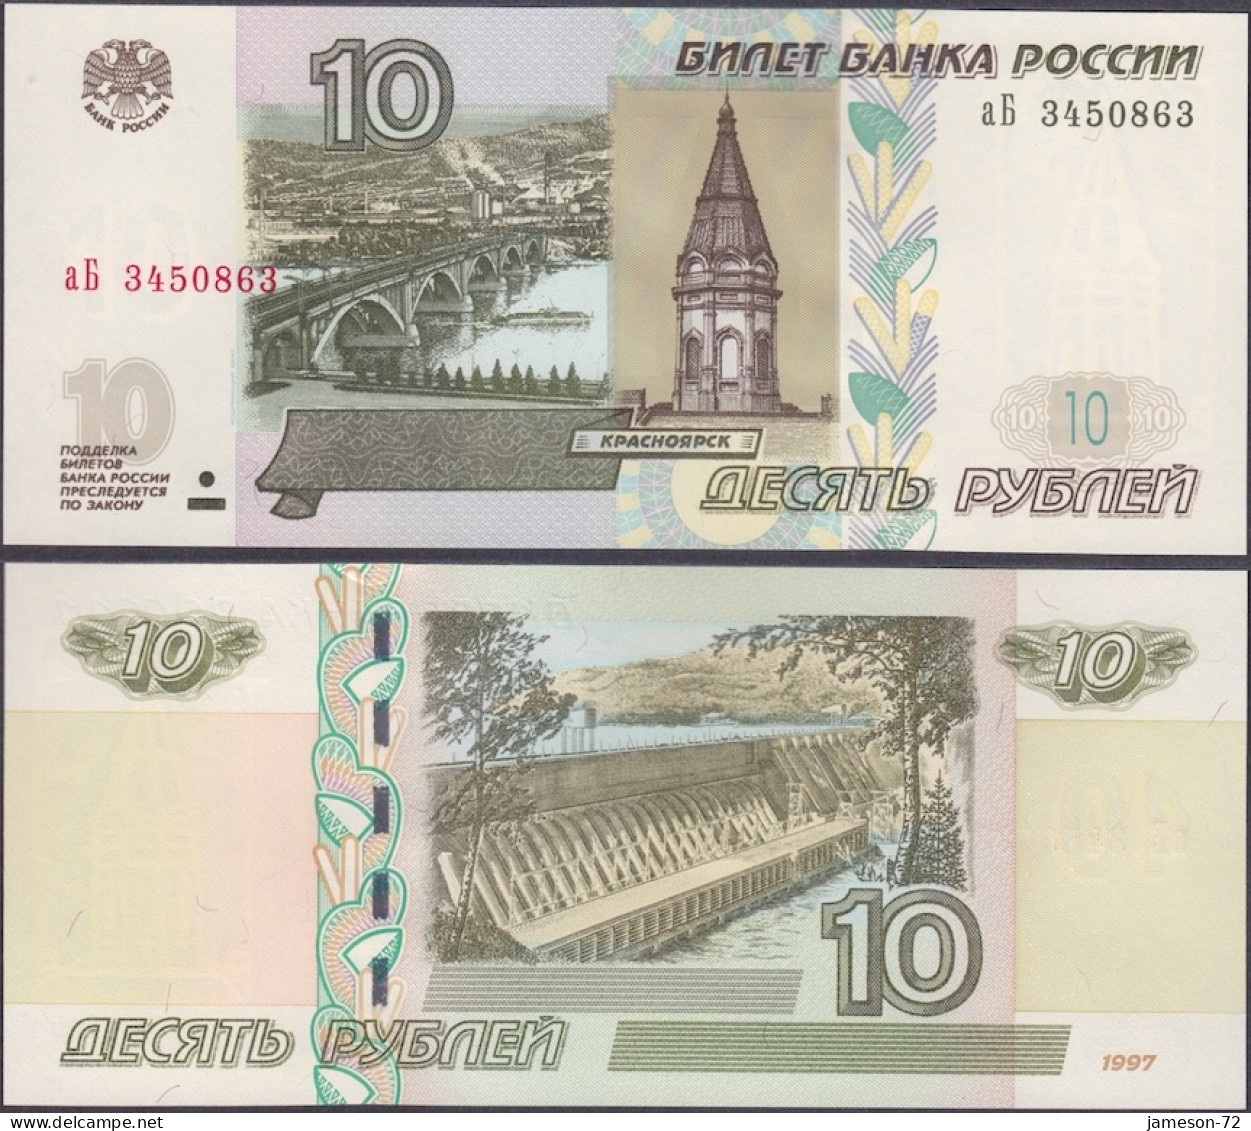 RUSSIA - 10 Rubles 1997 P# 268a Europe Banknote - Edelweiss Coins - Rusia